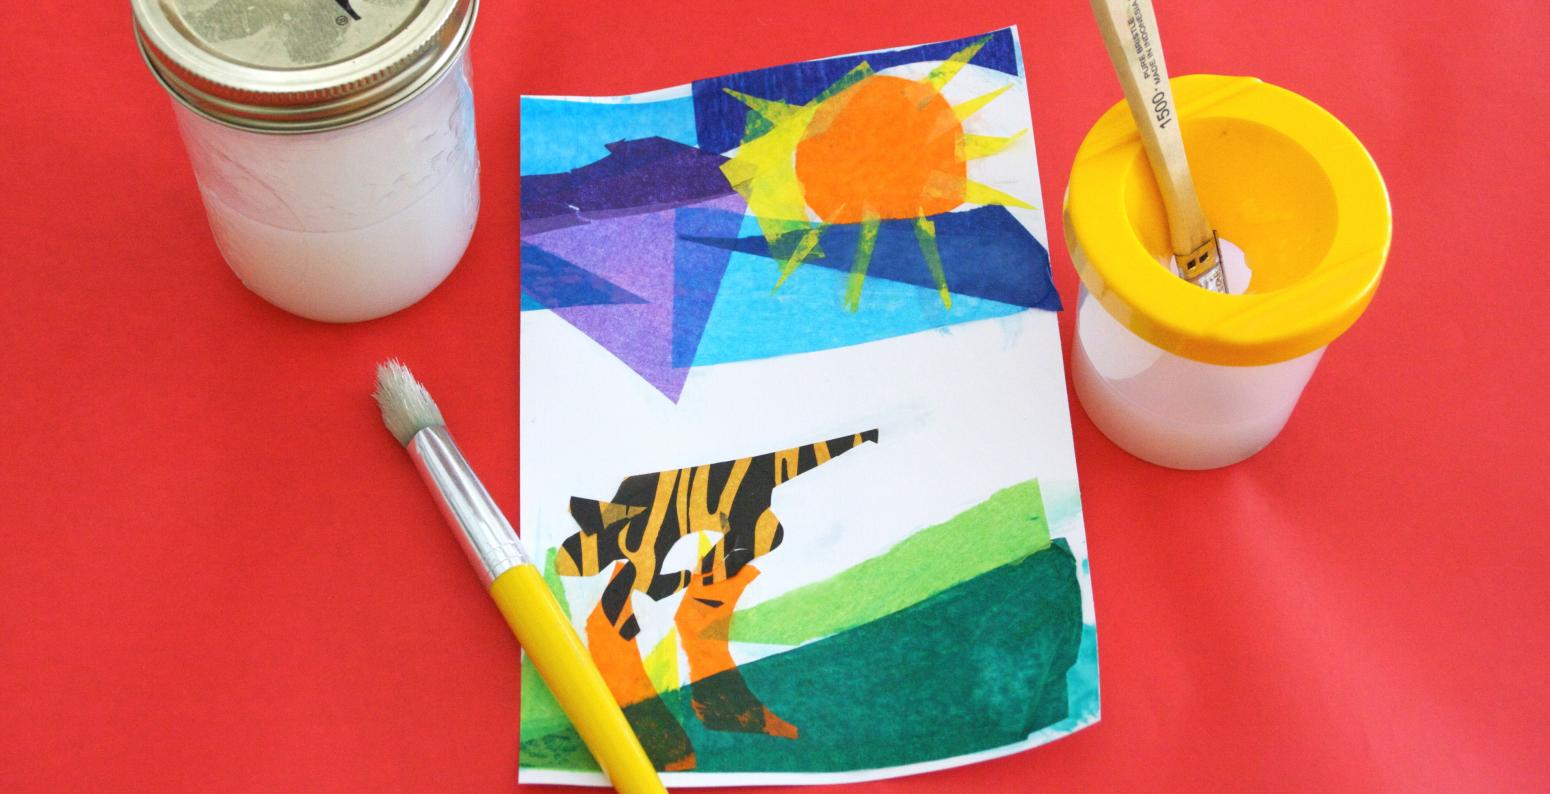 A tissue paper collage of an animal in a landscape with a Ball jar of glue, two paintbrushes, and a no-spill cup.